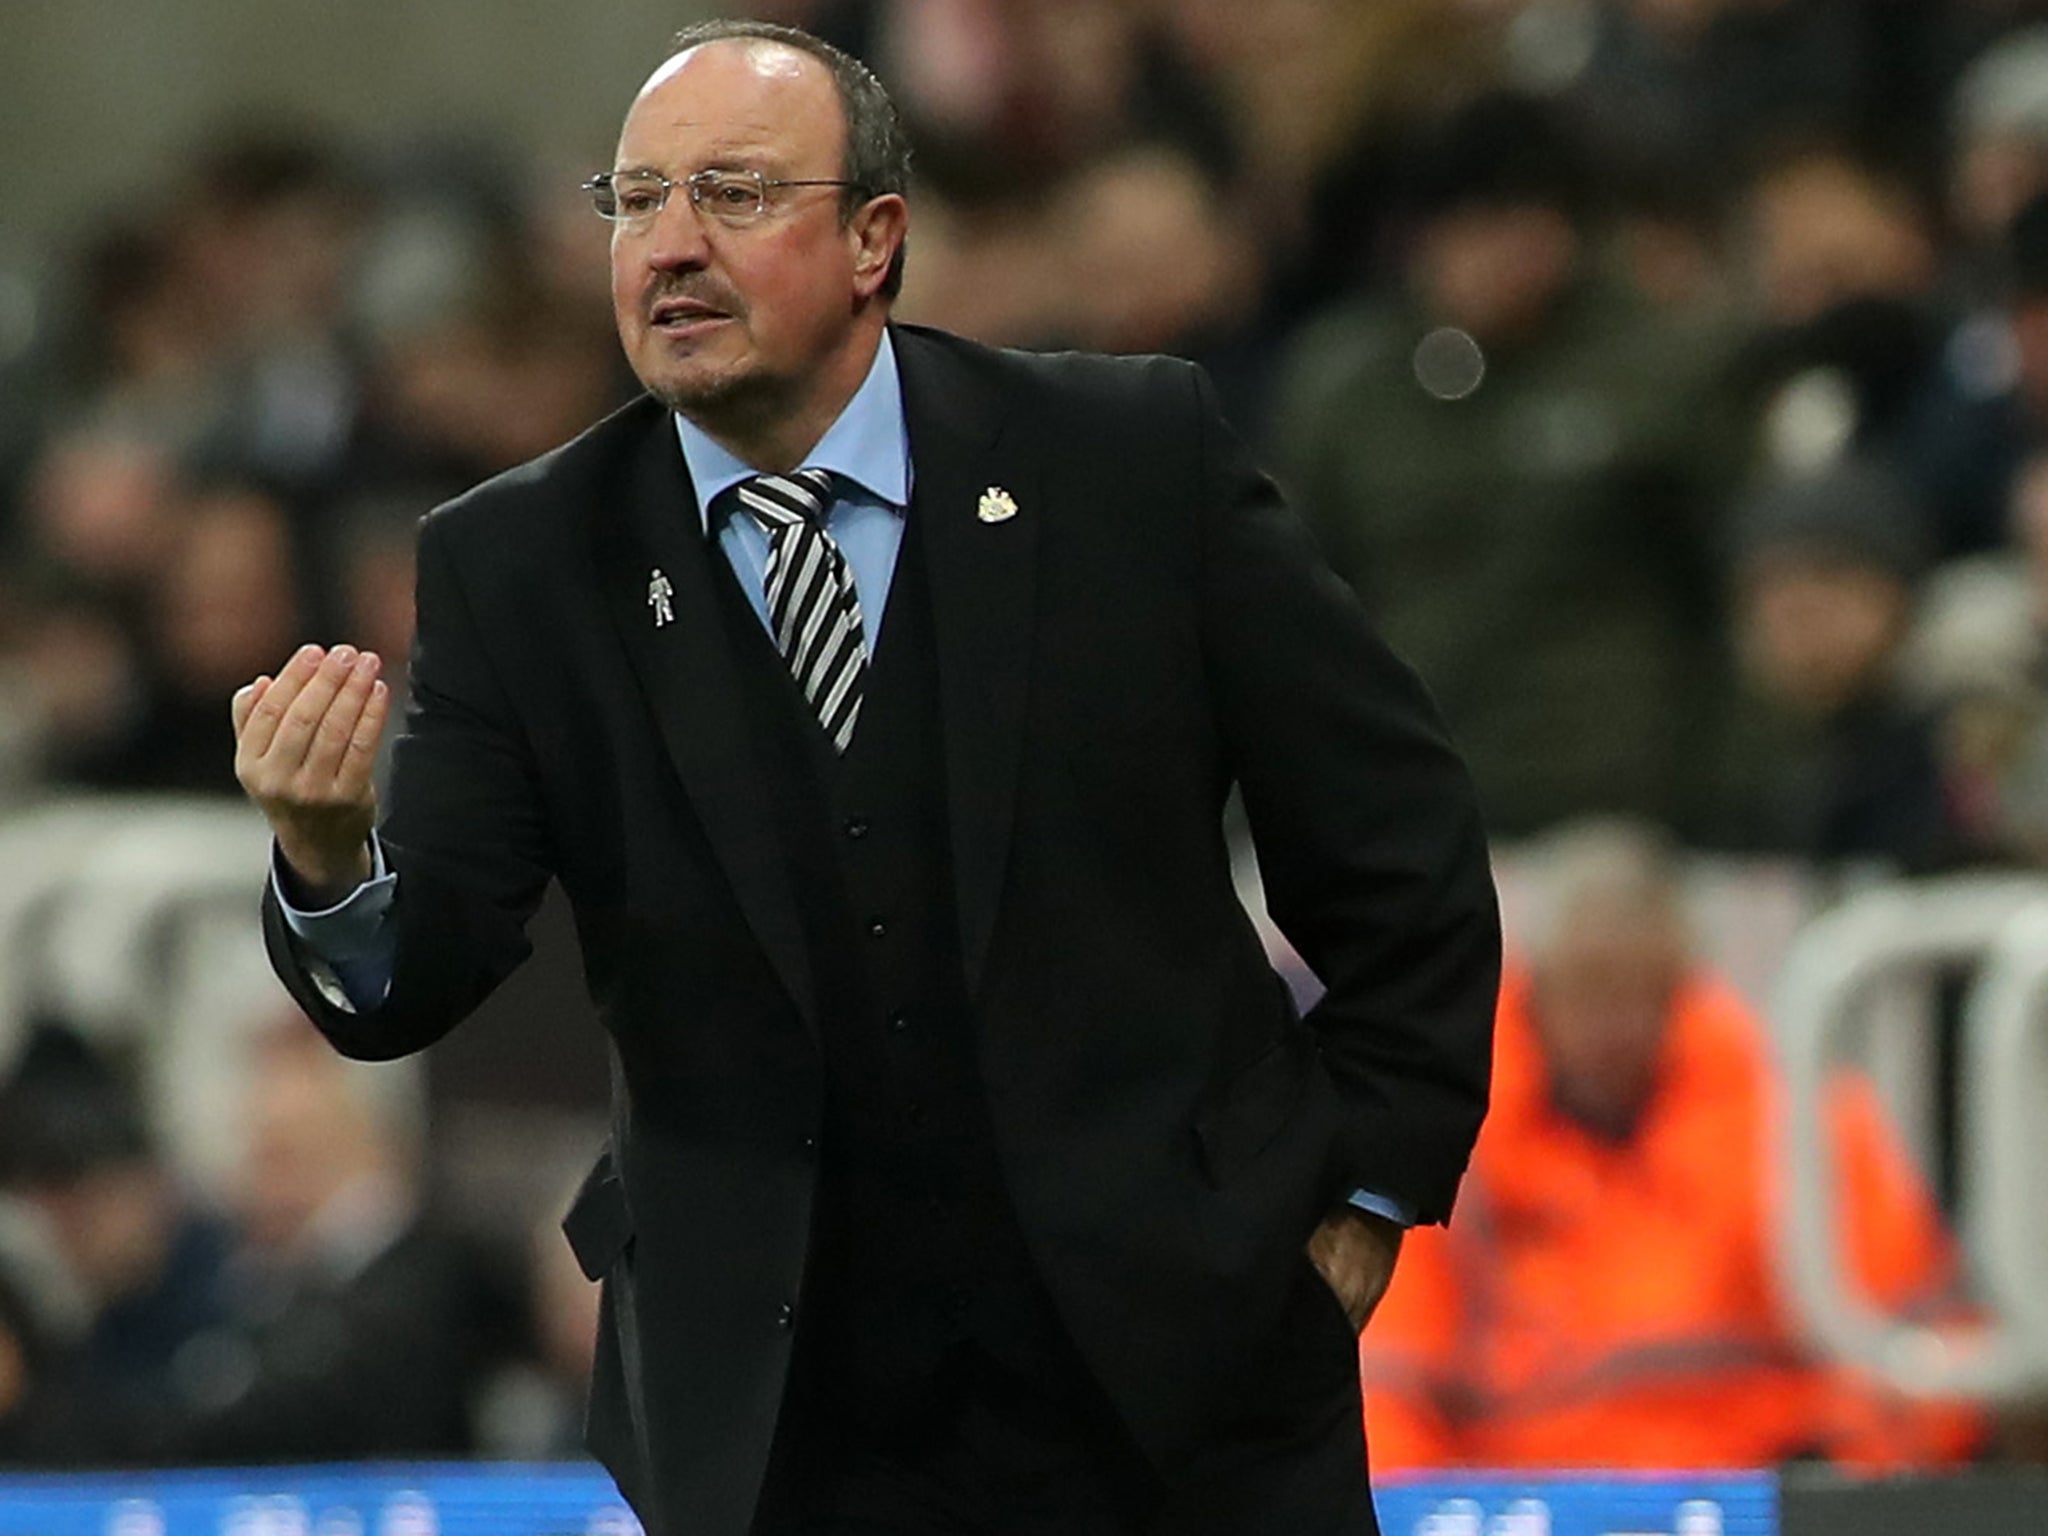 Newcastle are just one point above the relegation zone after their slump in form